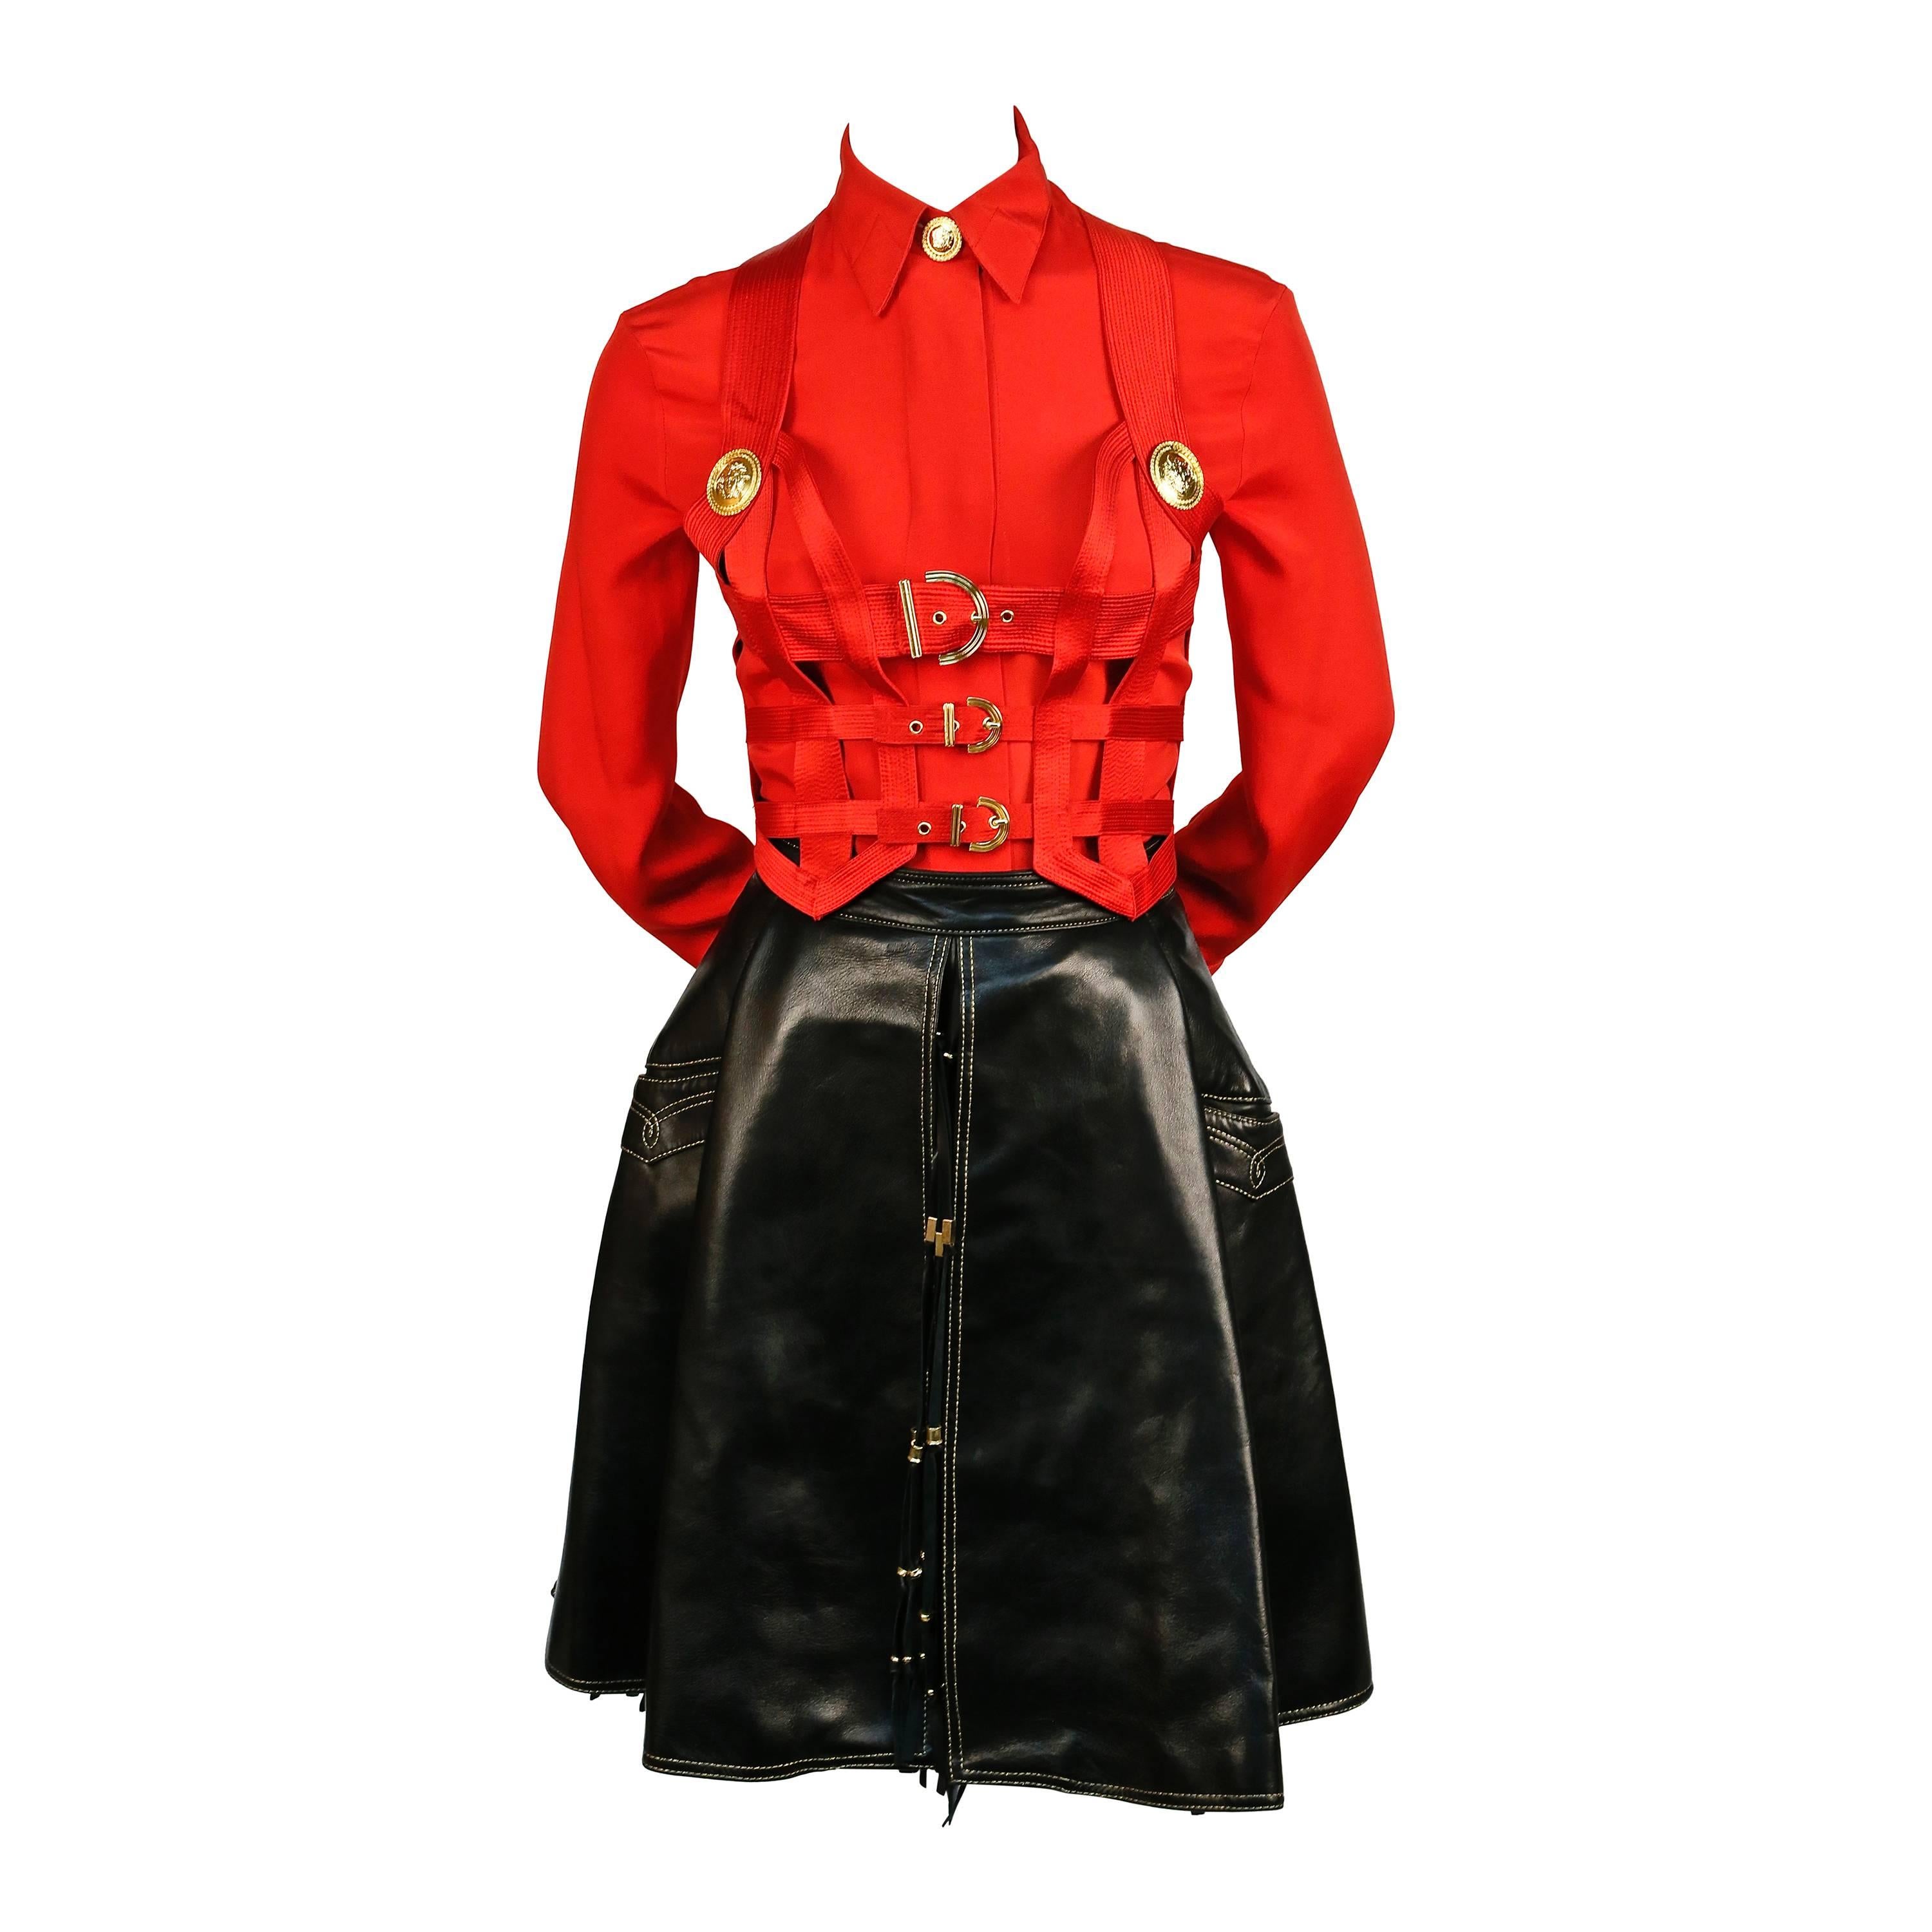 Iconic GIANNI VERSACE Bondage Harness silk blouse and leather skirt Fall 1992